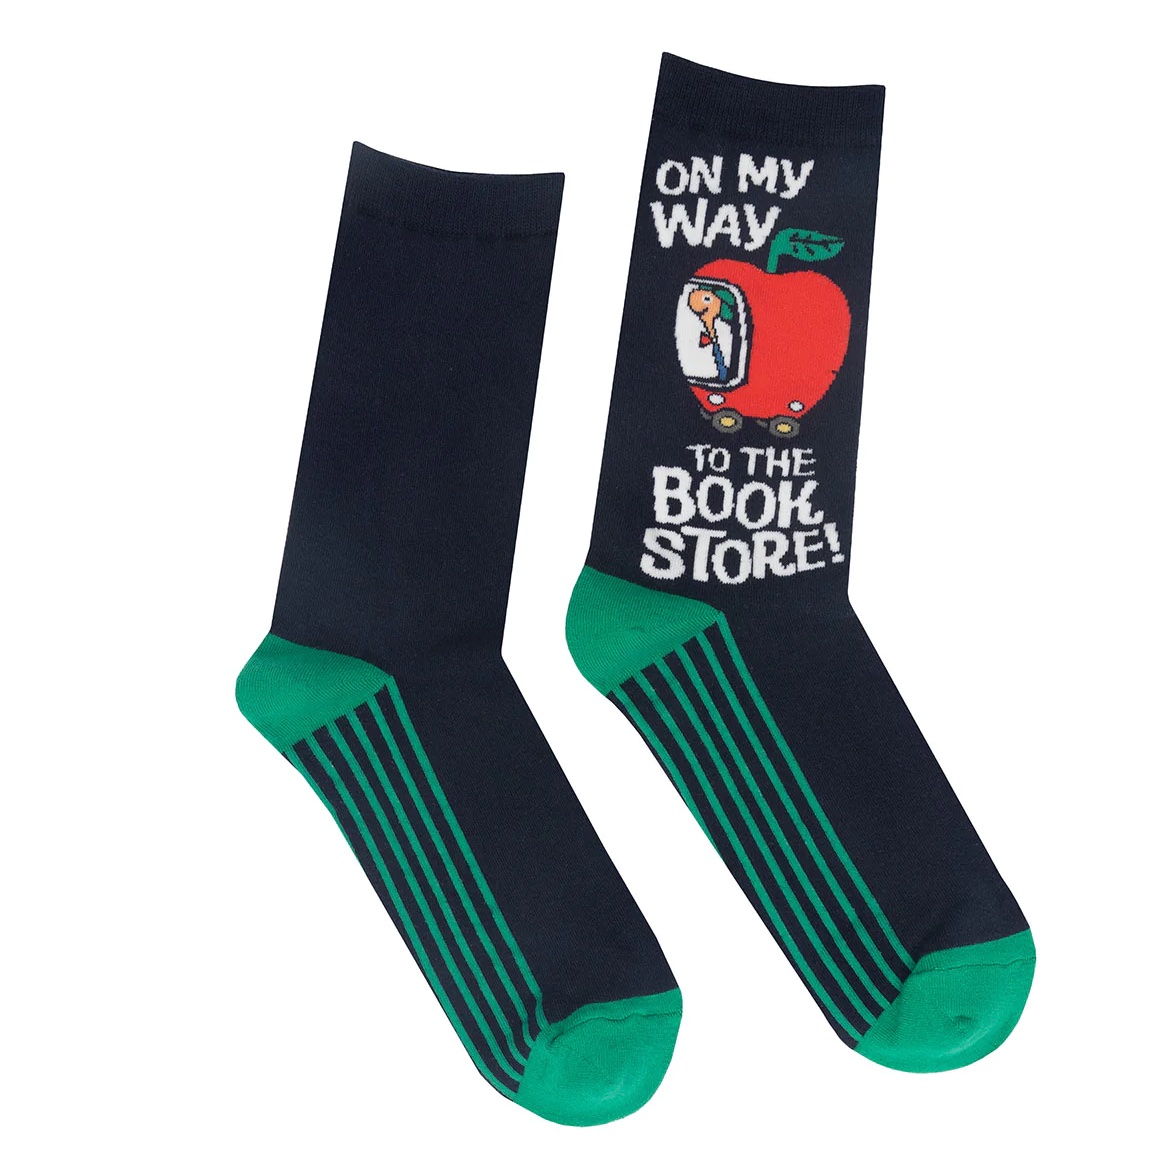 🚨 30% OFF TODAY ONLY 🚨 Richard Scarry 'On My Way to the Bookstore' socks from @OutofPrintTees! Get yours here: bit.ly/RS-SOCKS 🧦